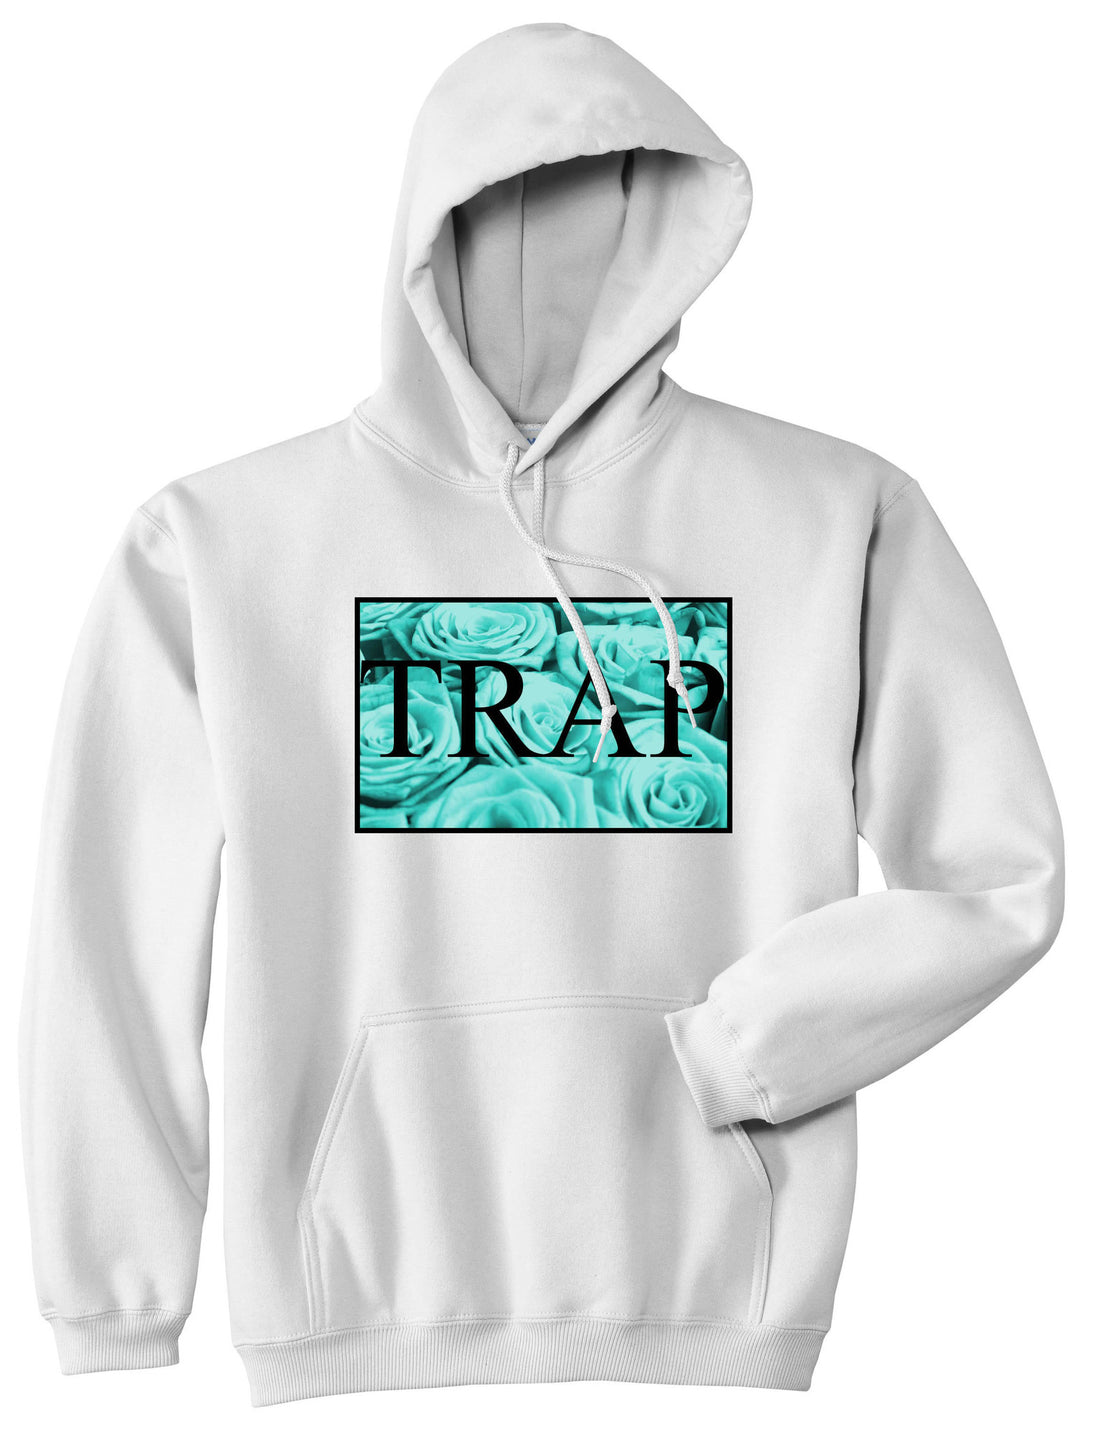 Trap Floral Style Hood Music Hood Dope Pullover Hoodie Hoody in White by Kings Of NY